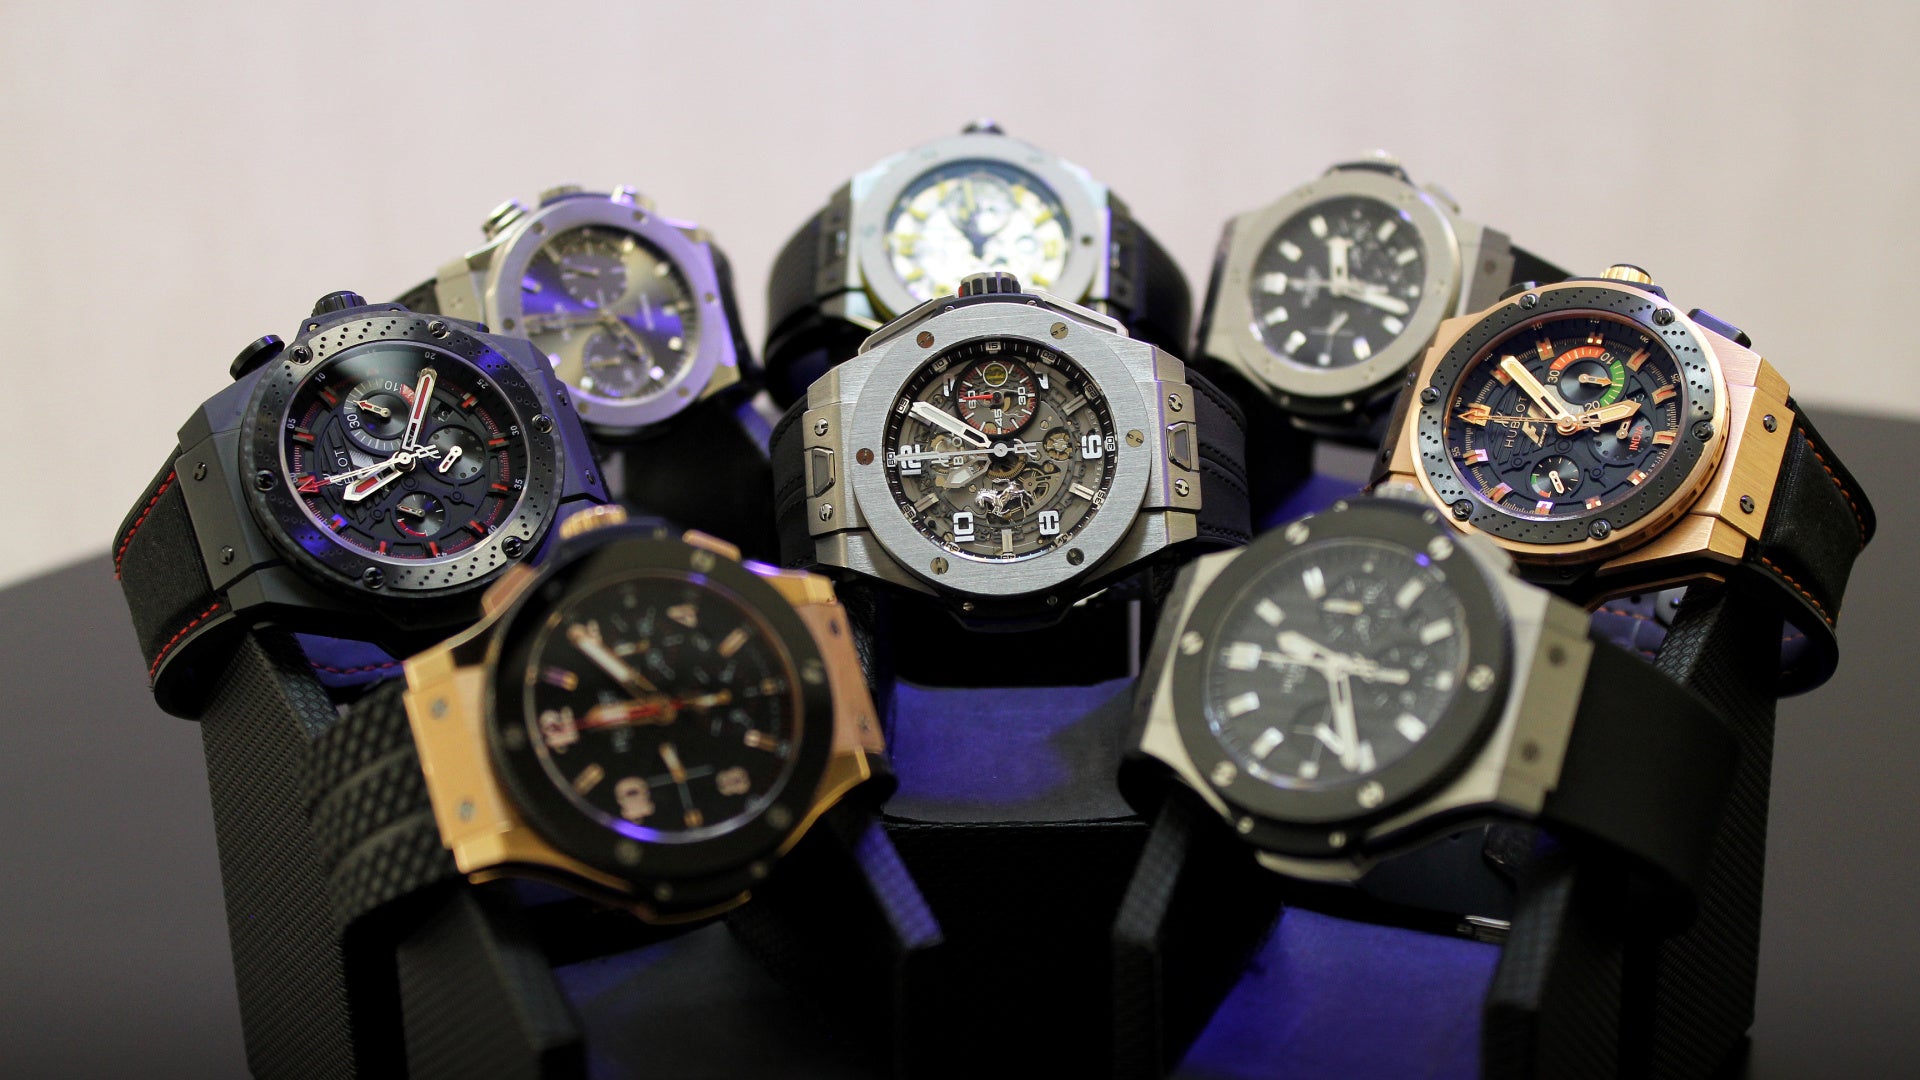 Buy Hublot watches, Certified Authenticity